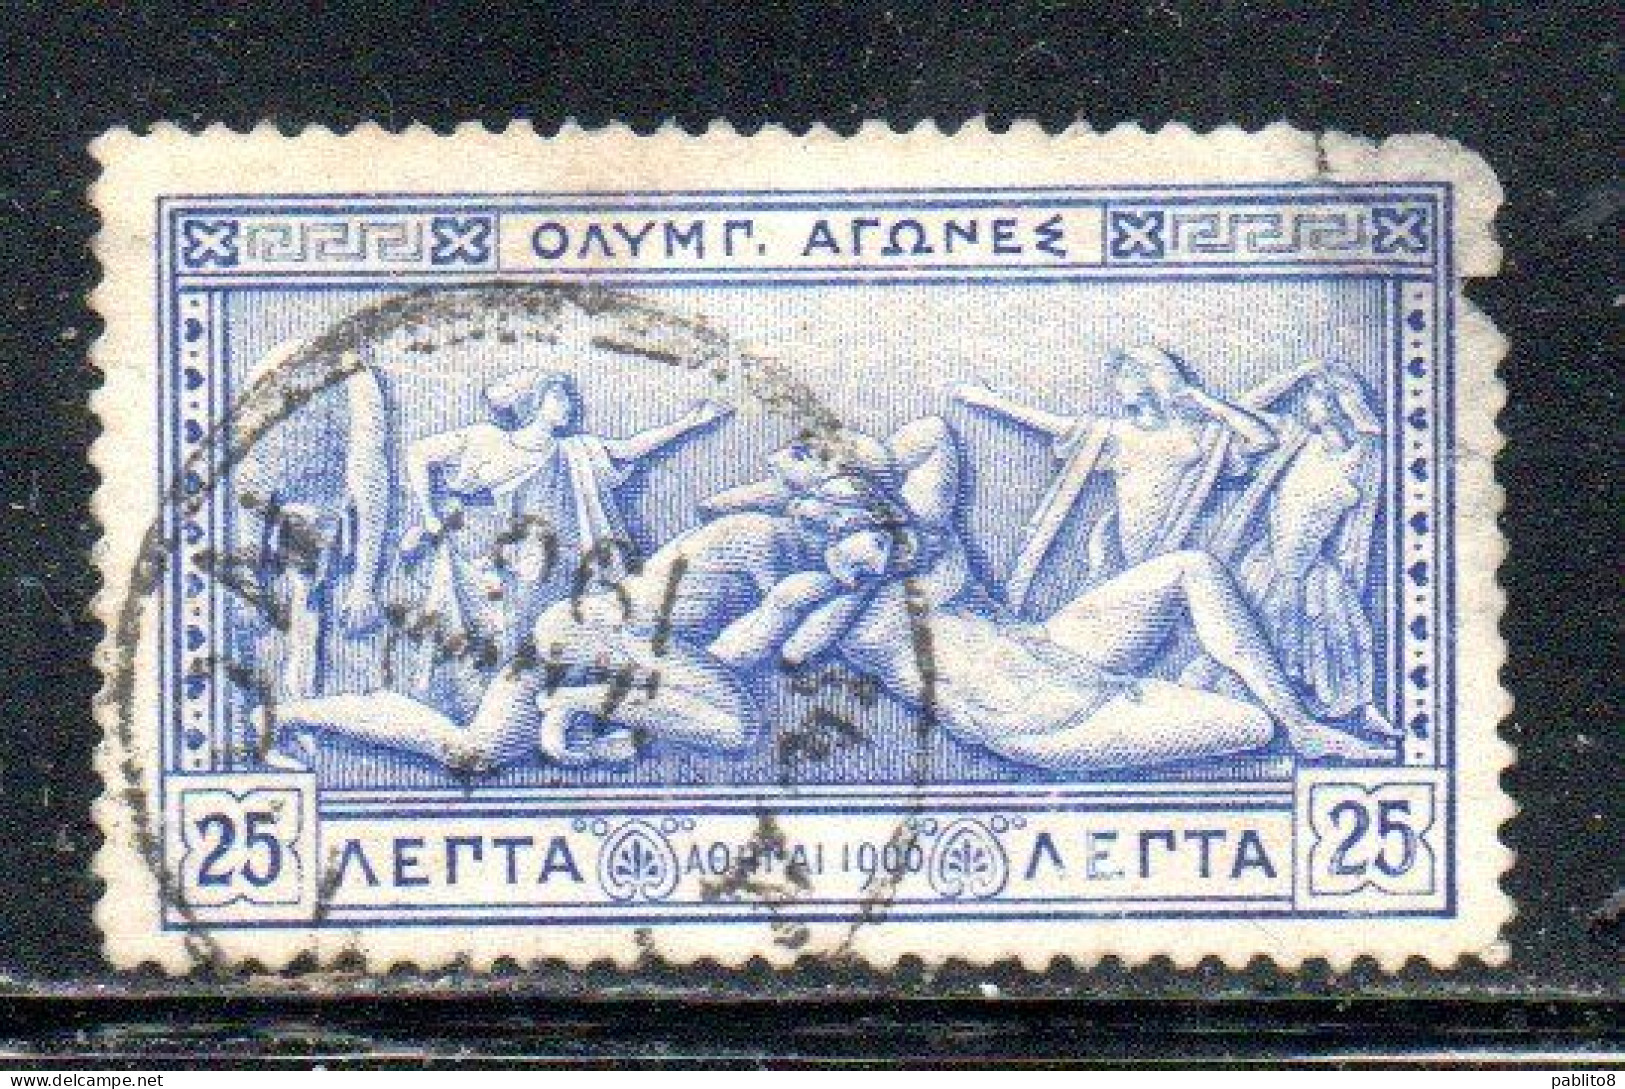 GREECE GRECIA ELLAS 1906 GREEK SPECIAL OLYMPIC GAMES ATHENS STRUGGLE OF HERCULES AND ANTEUS 25l USED USATO OBLITERE' - Used Stamps